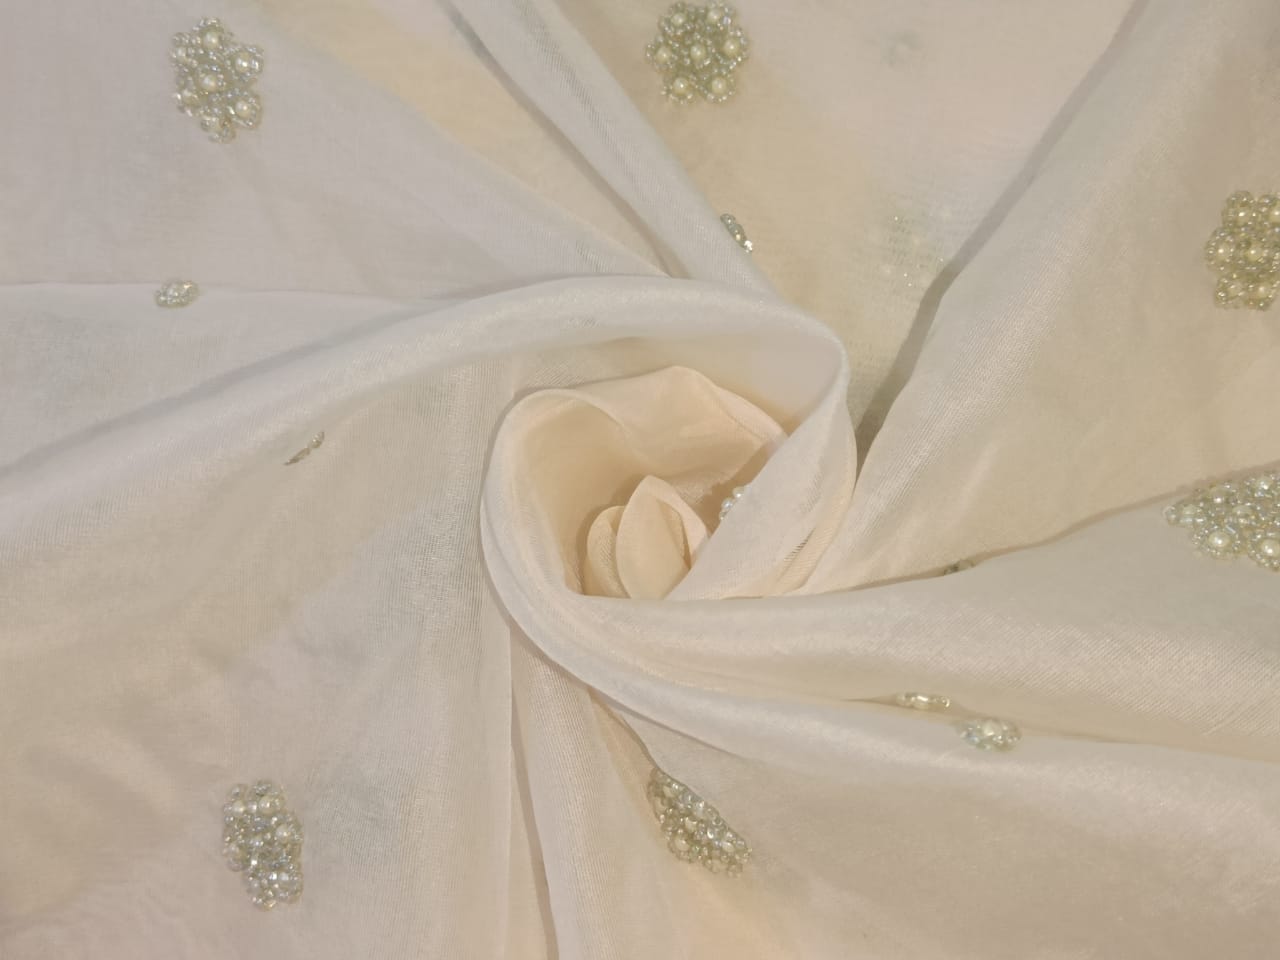 Silk organza with  pearl hand embroidery Semi Sheer fabric 54" wide available in 2 colors ivory and antique gold pearls/ivory and ivory pearls [11662/63]